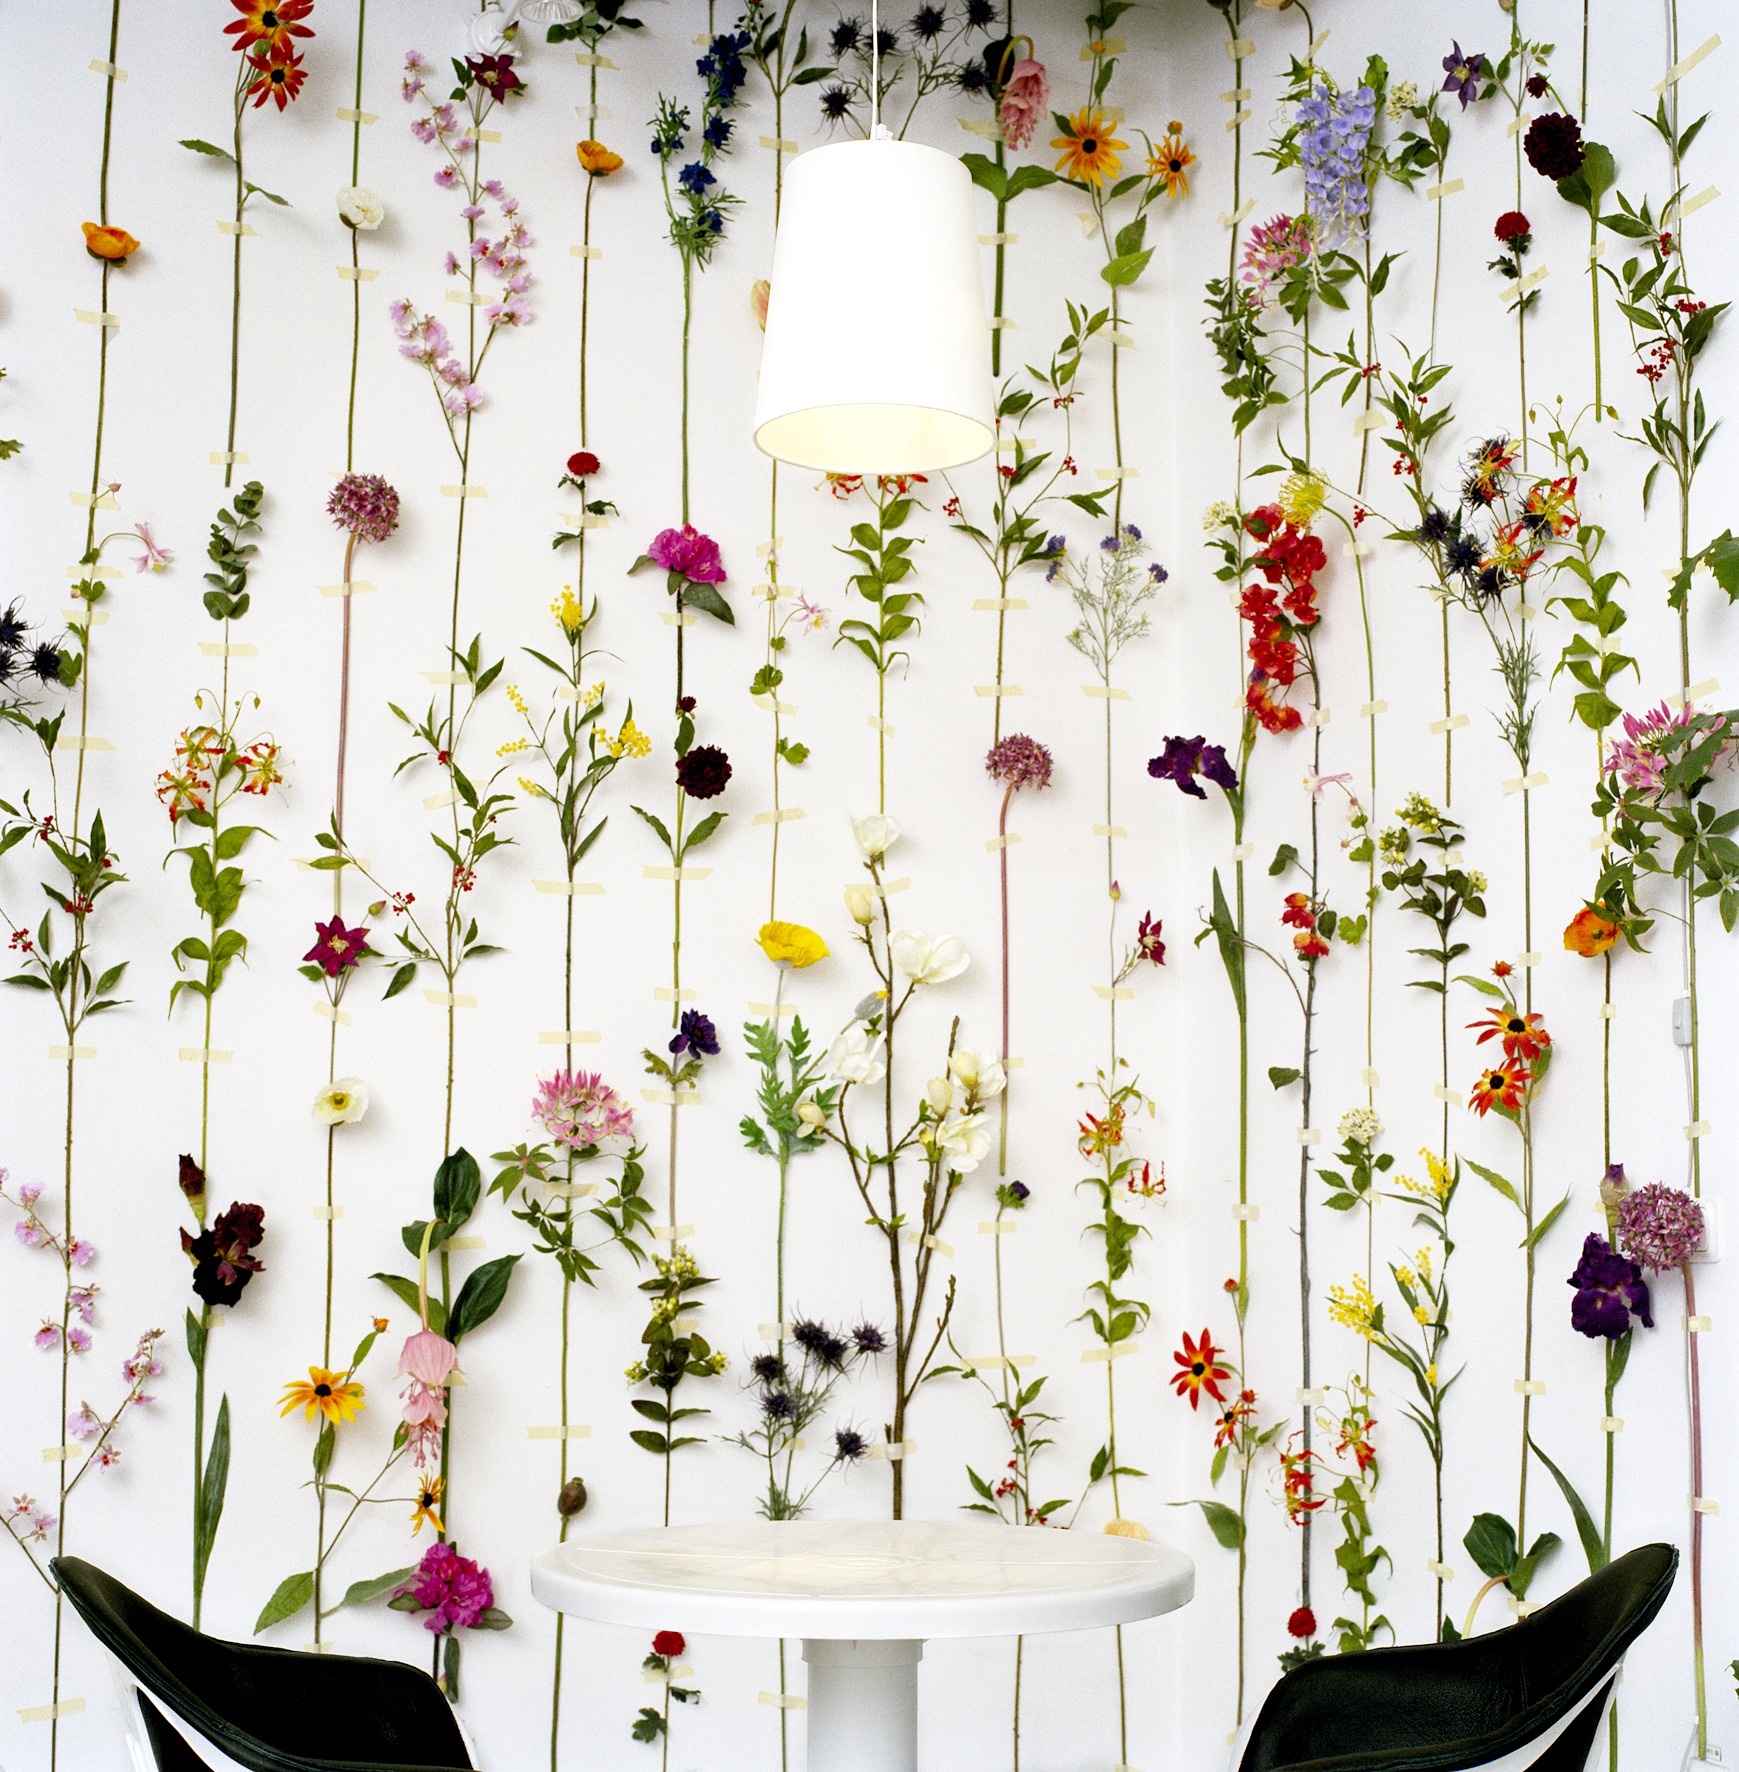 Fascinating Hanging Flower Decor Will Bring Freshness Into Your Home